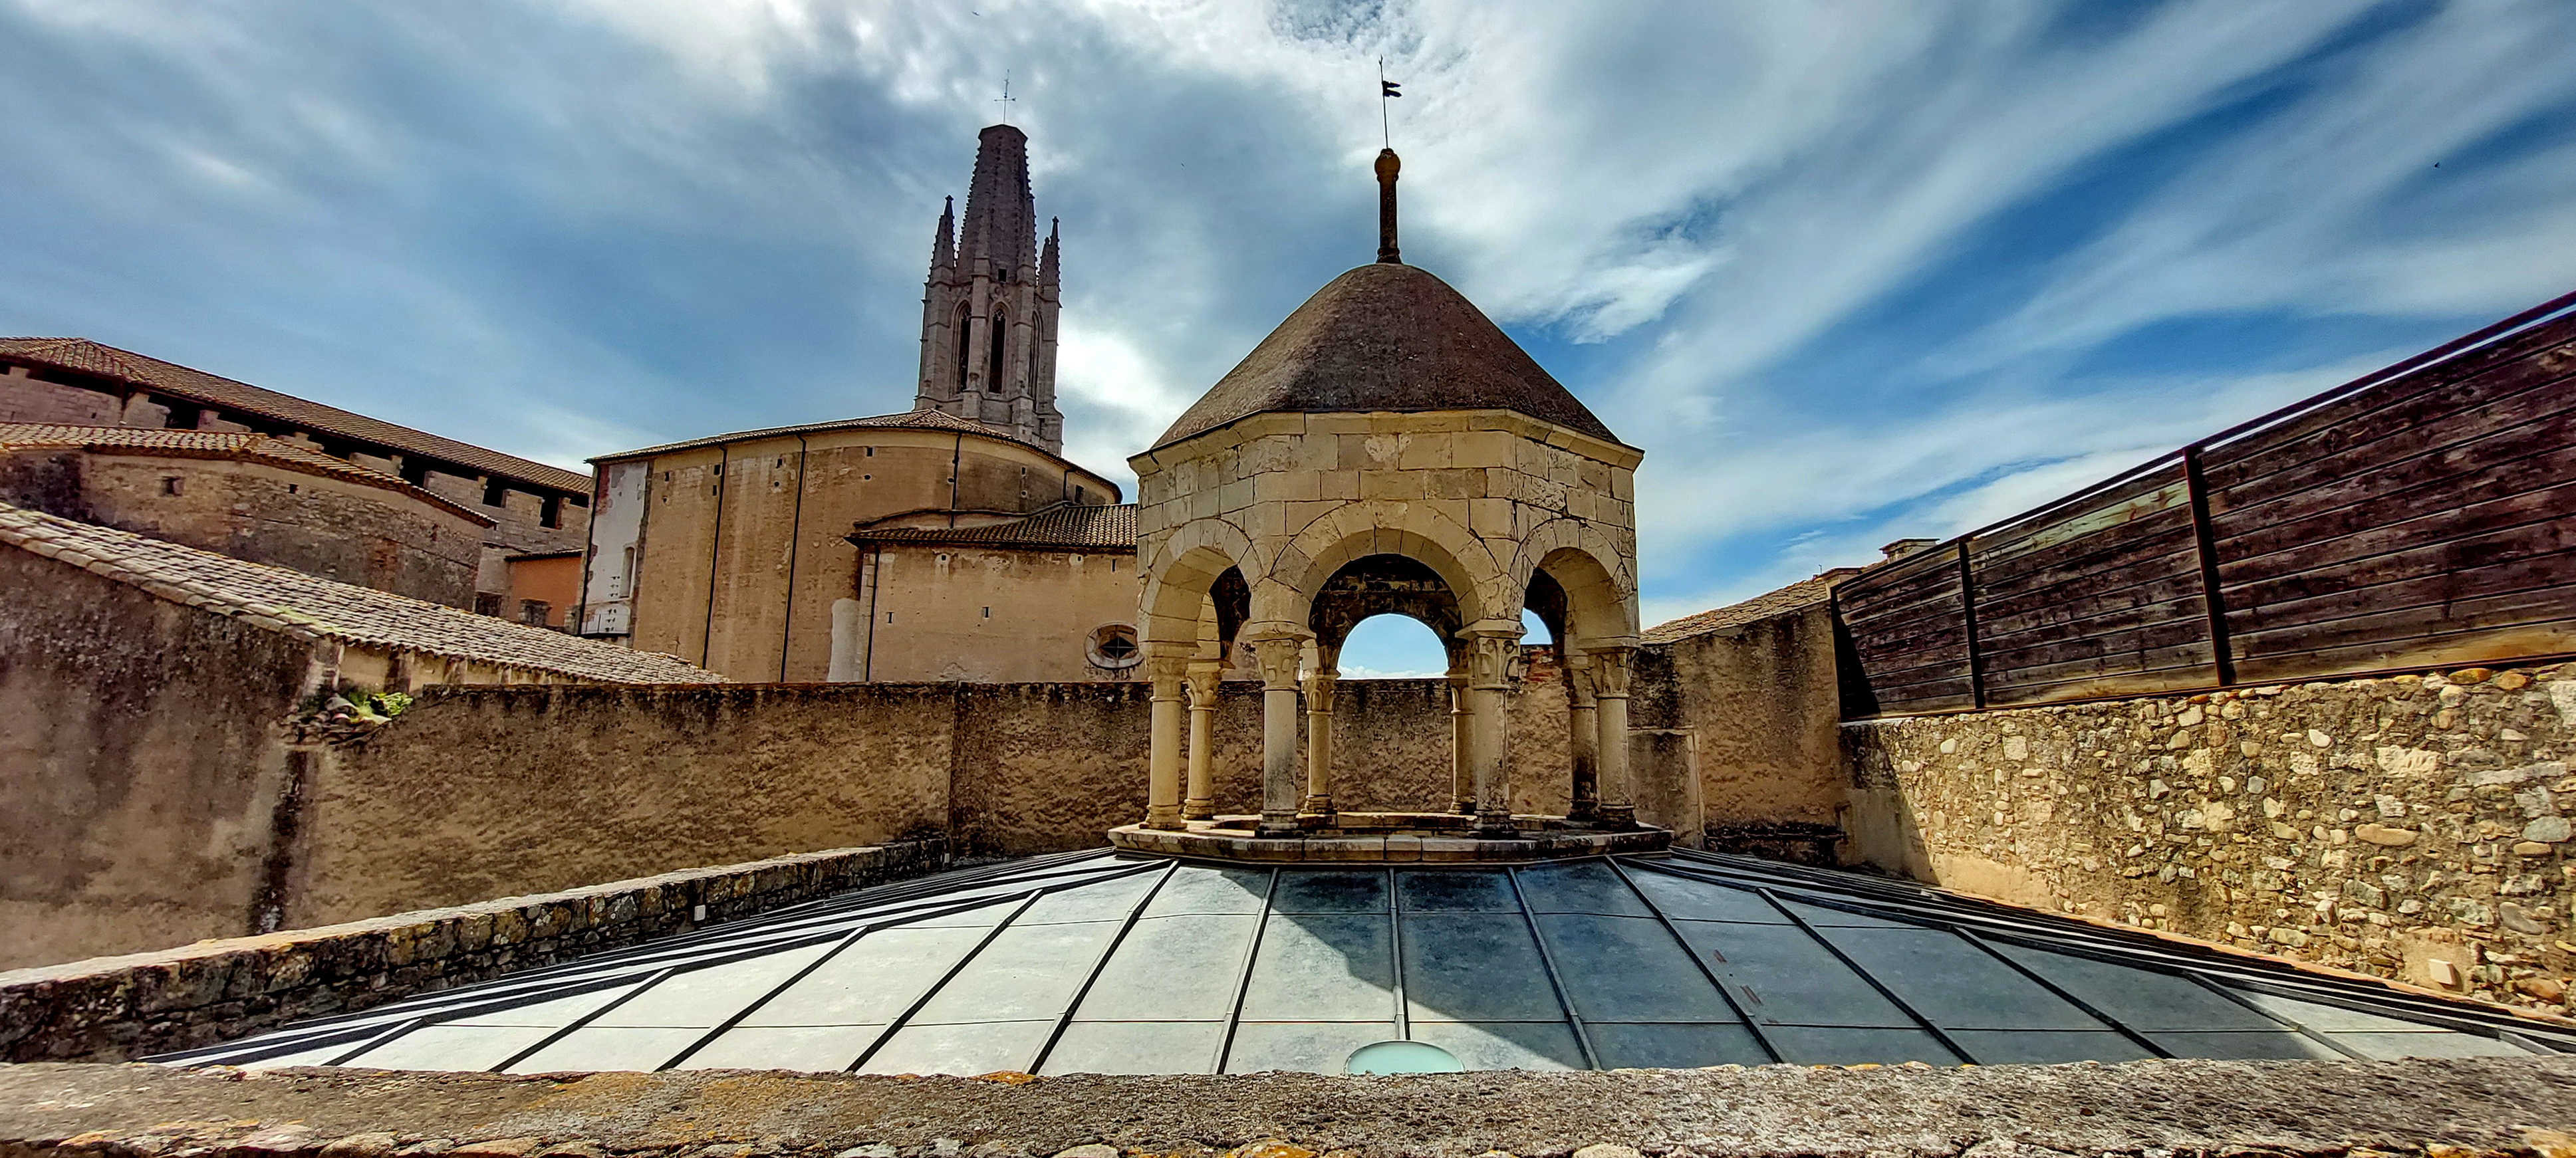 Rooftop (Arab baths) and bell tower